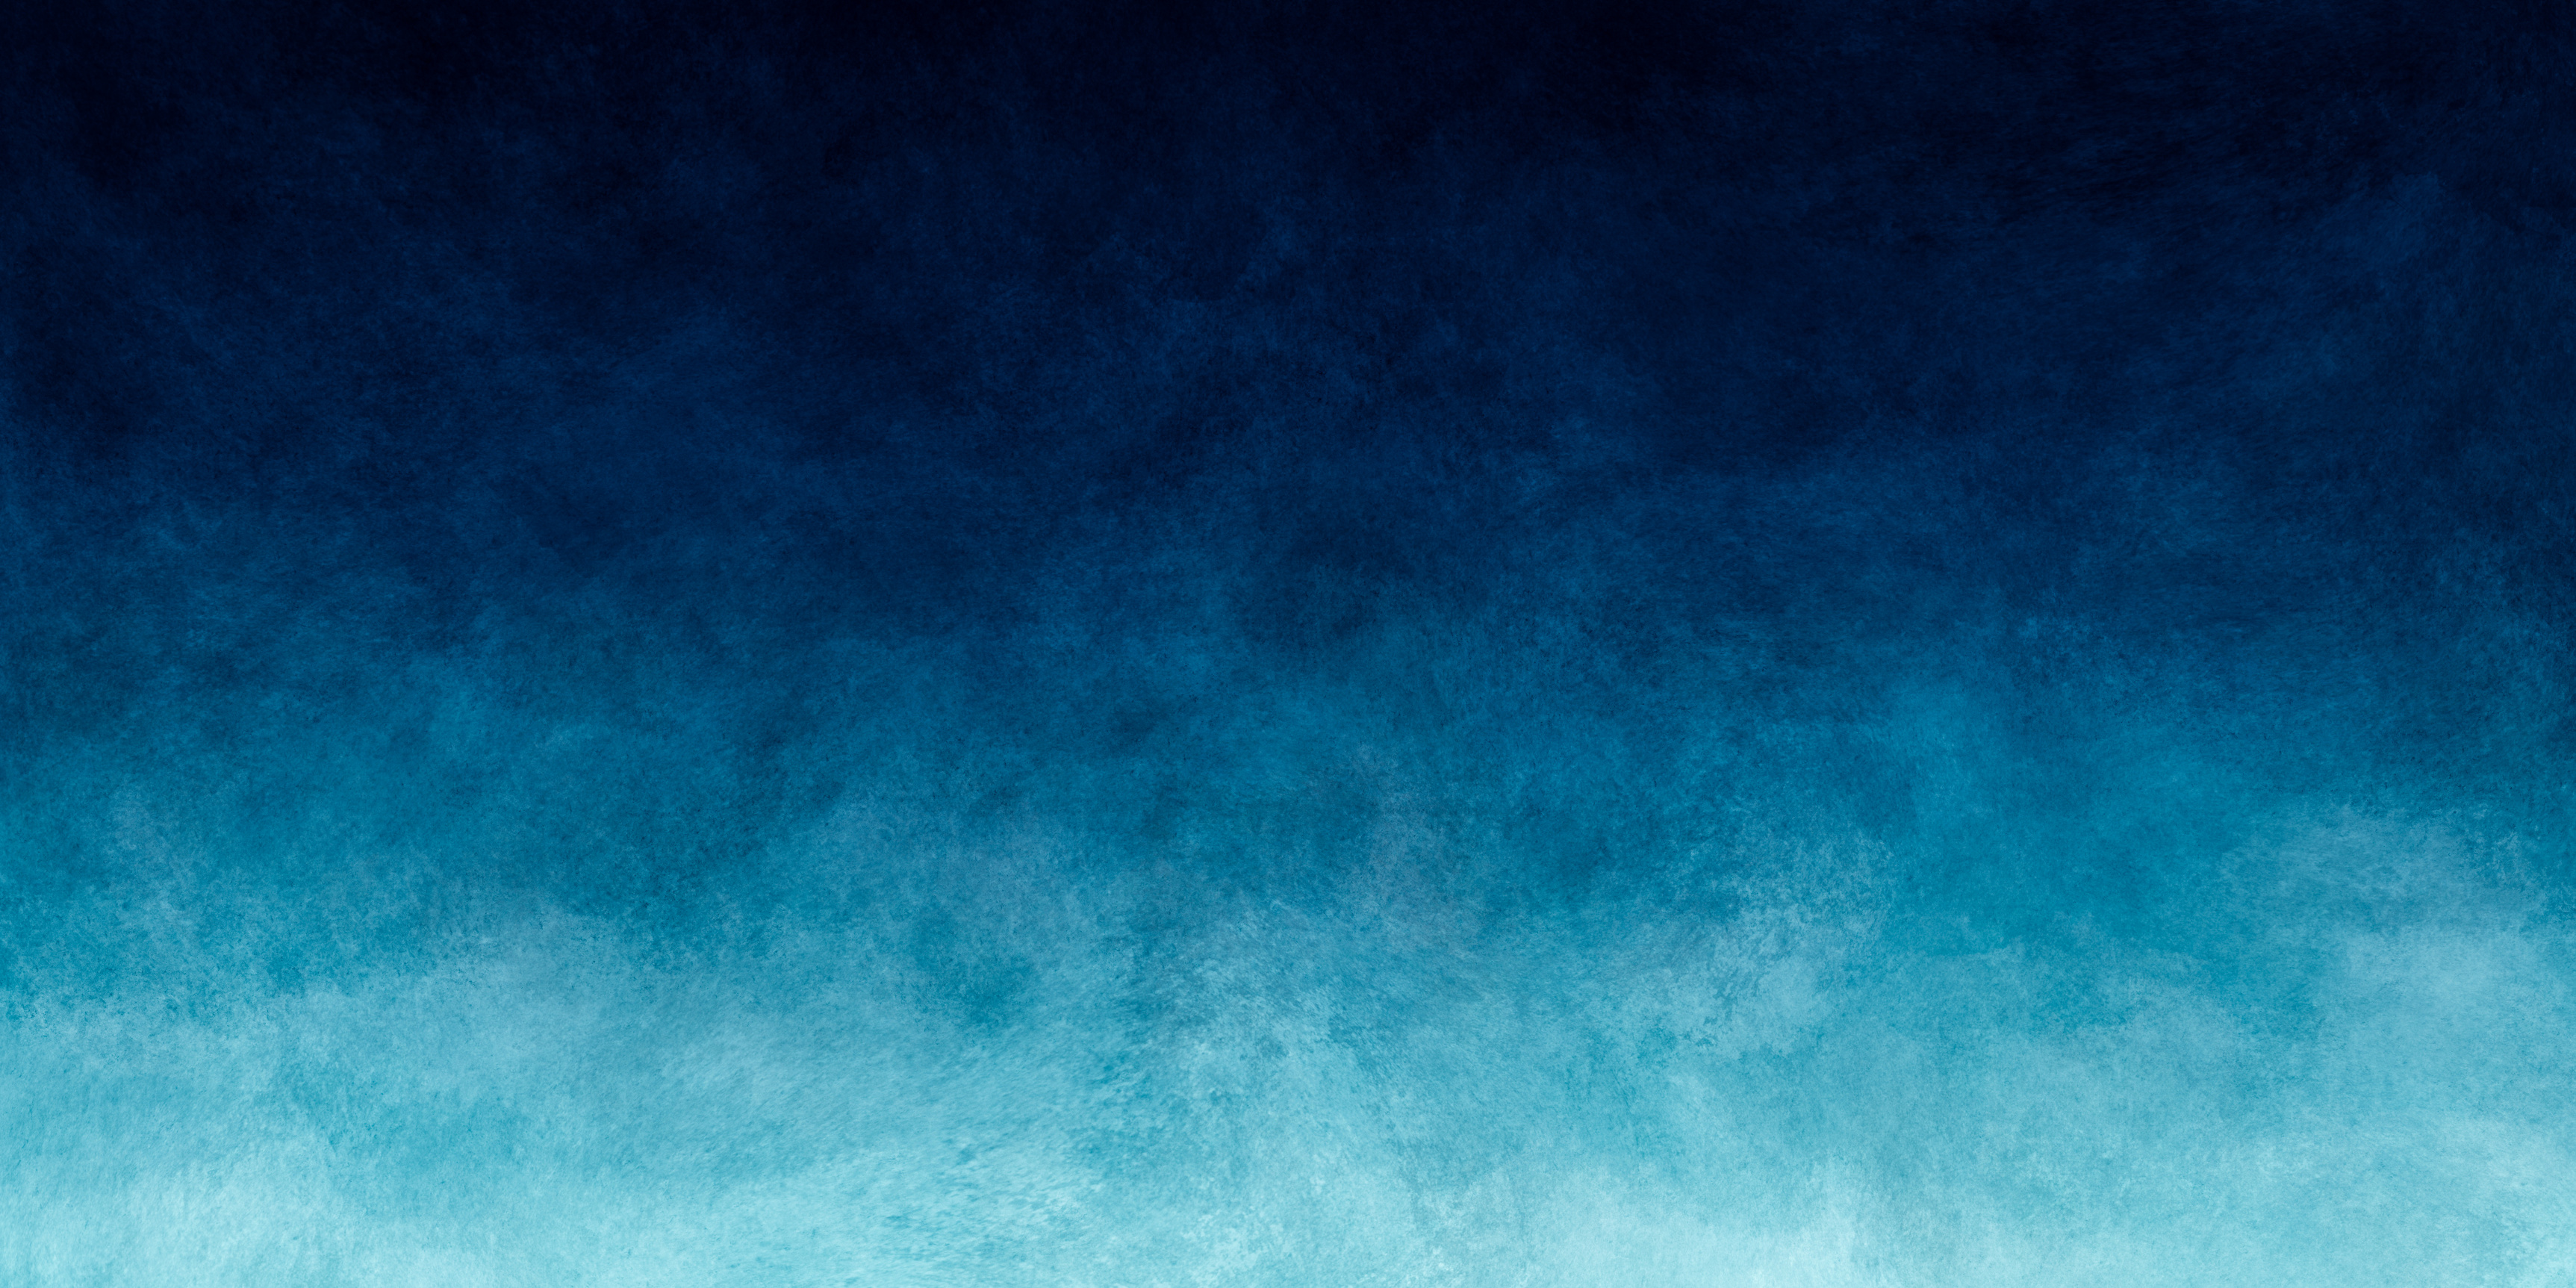 Blue teal watercolor paint background